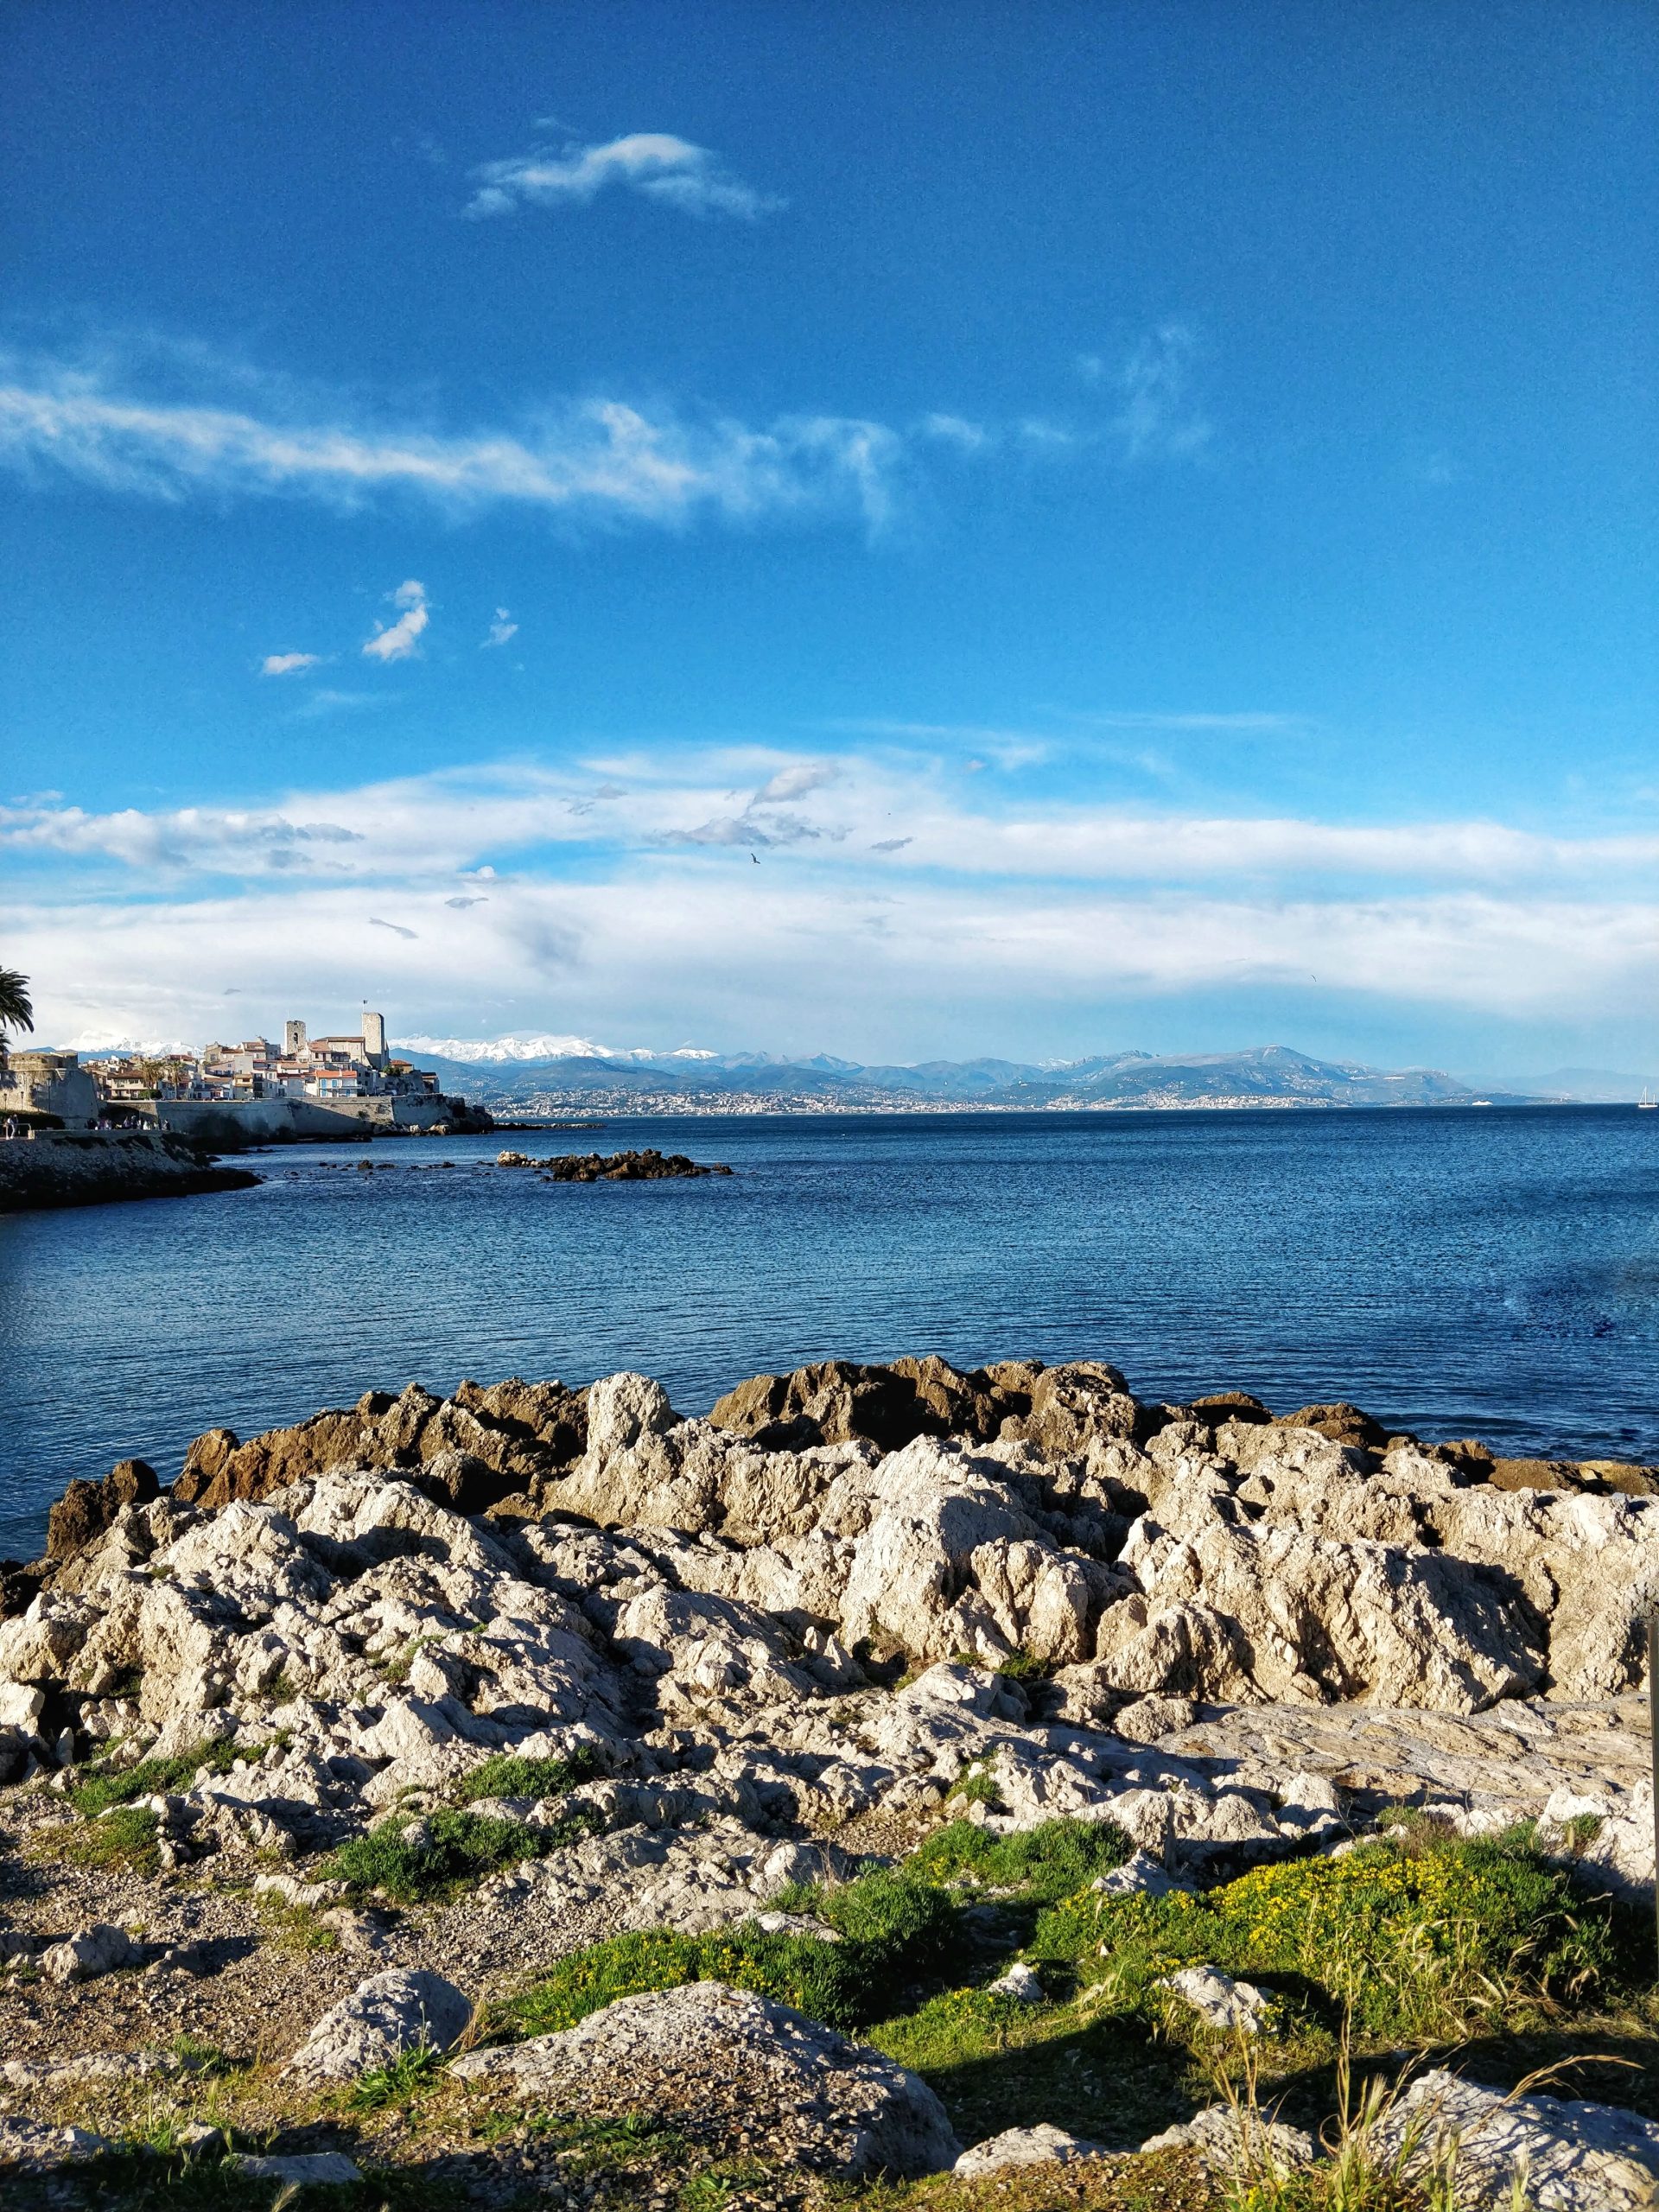 South Of France – Antibes or Cannes